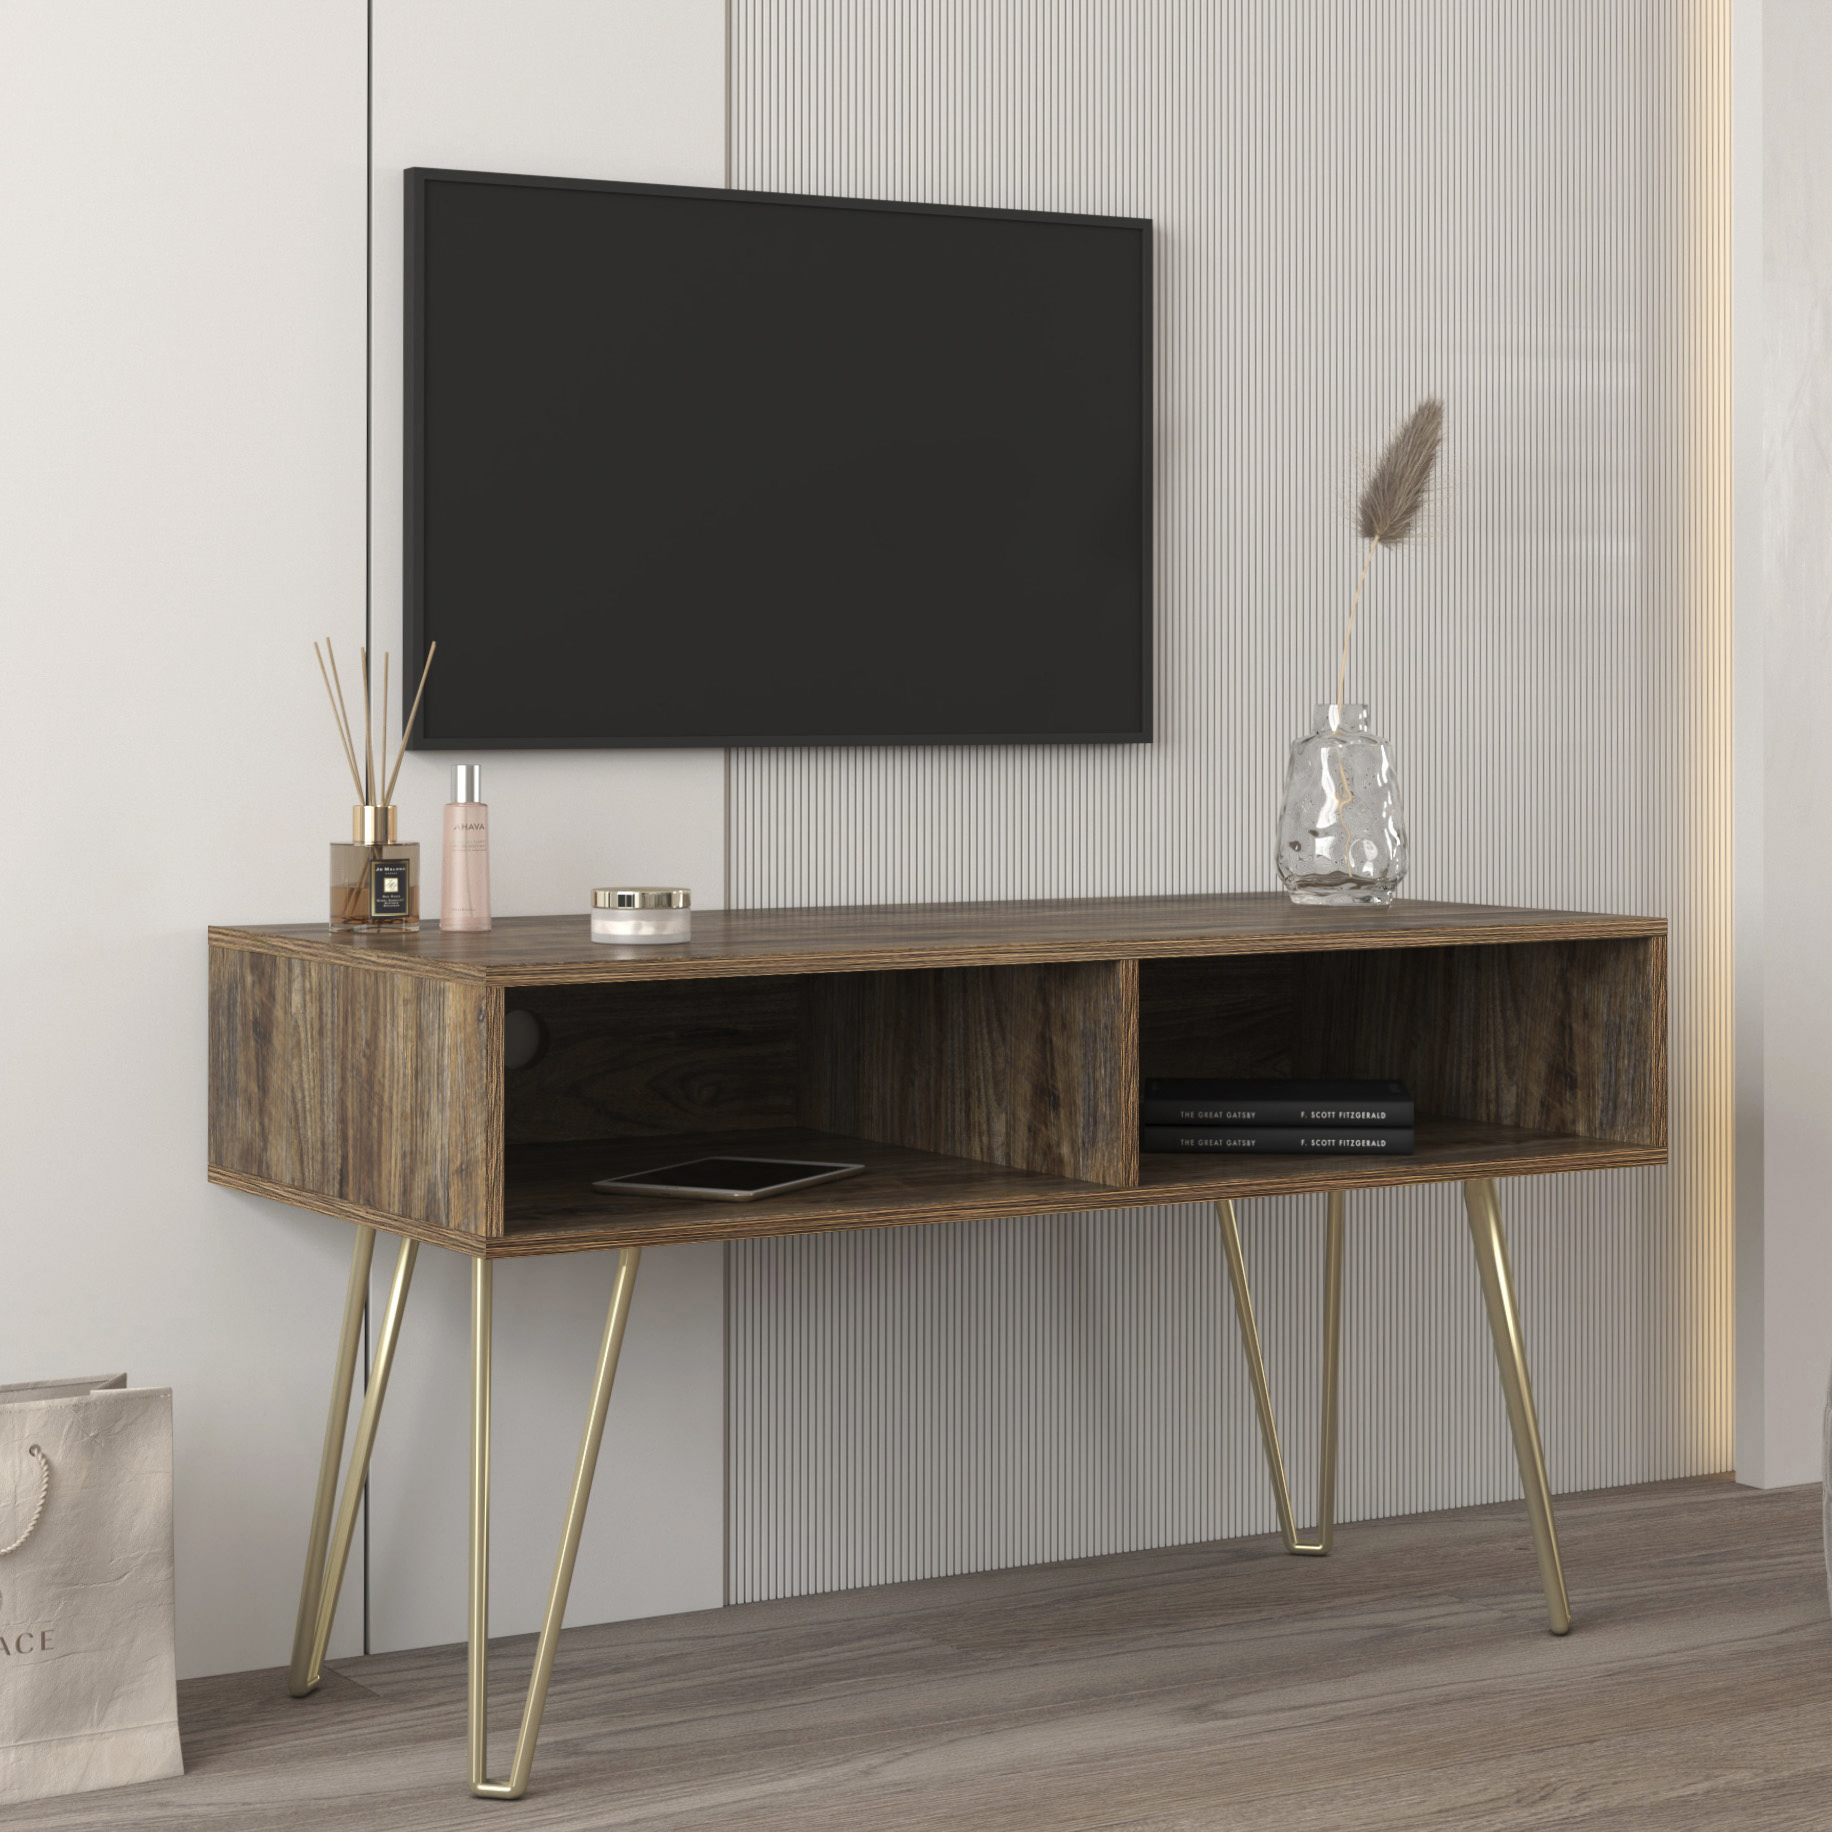 Modern Design TV stand stable Metal Legs  with 2 open shelves to put TV, DVD, router, books, and small ornaments,Espresso-CASAINC